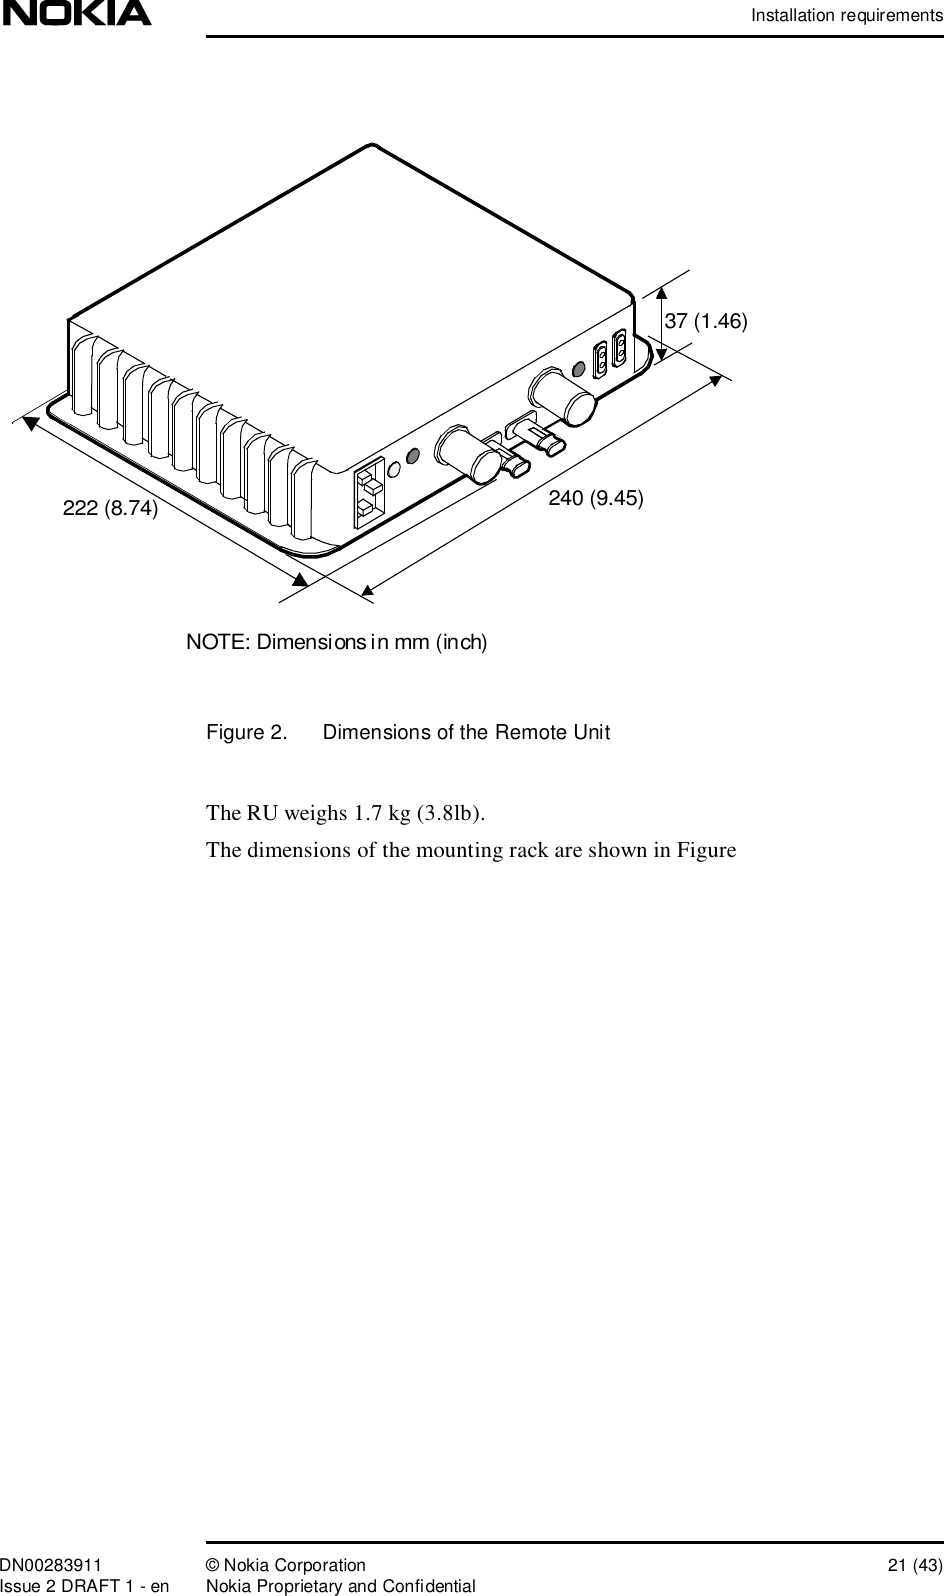 Installation requirementsDN00283911 © Nokia Corporation 21 (43)Issue 2 DRAFT 1 - en Nokia Proprietary and ConfidentialFigure 2.  Dimensions of the Remote UnitThe RU weighs 1.7 kg (3.8lb).The dimensions of the mounting rack are shown in Figure 240 (9.45)222 (8.74)37 (1.46)NOTE: Dimensions in mm (inch)